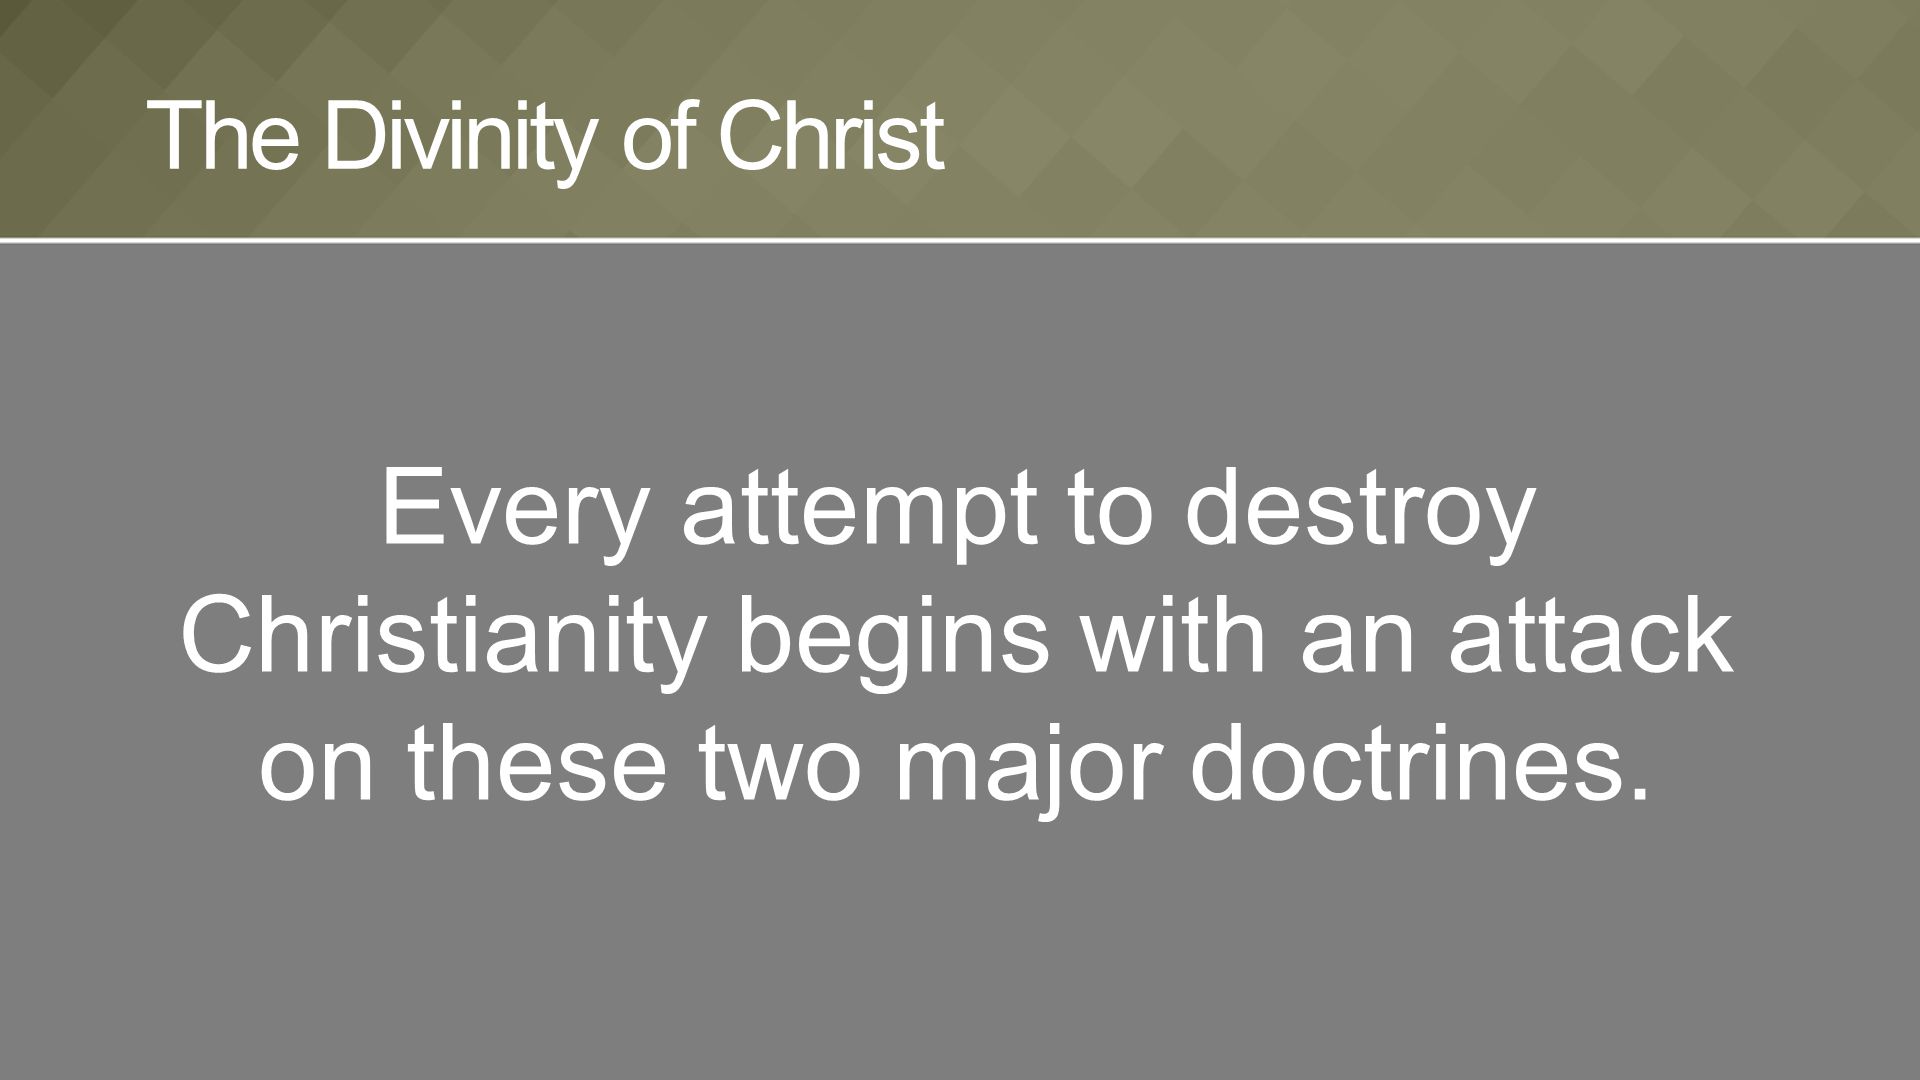 Every attempt to destroy Christianity begins with an attack on these two major doctrines.